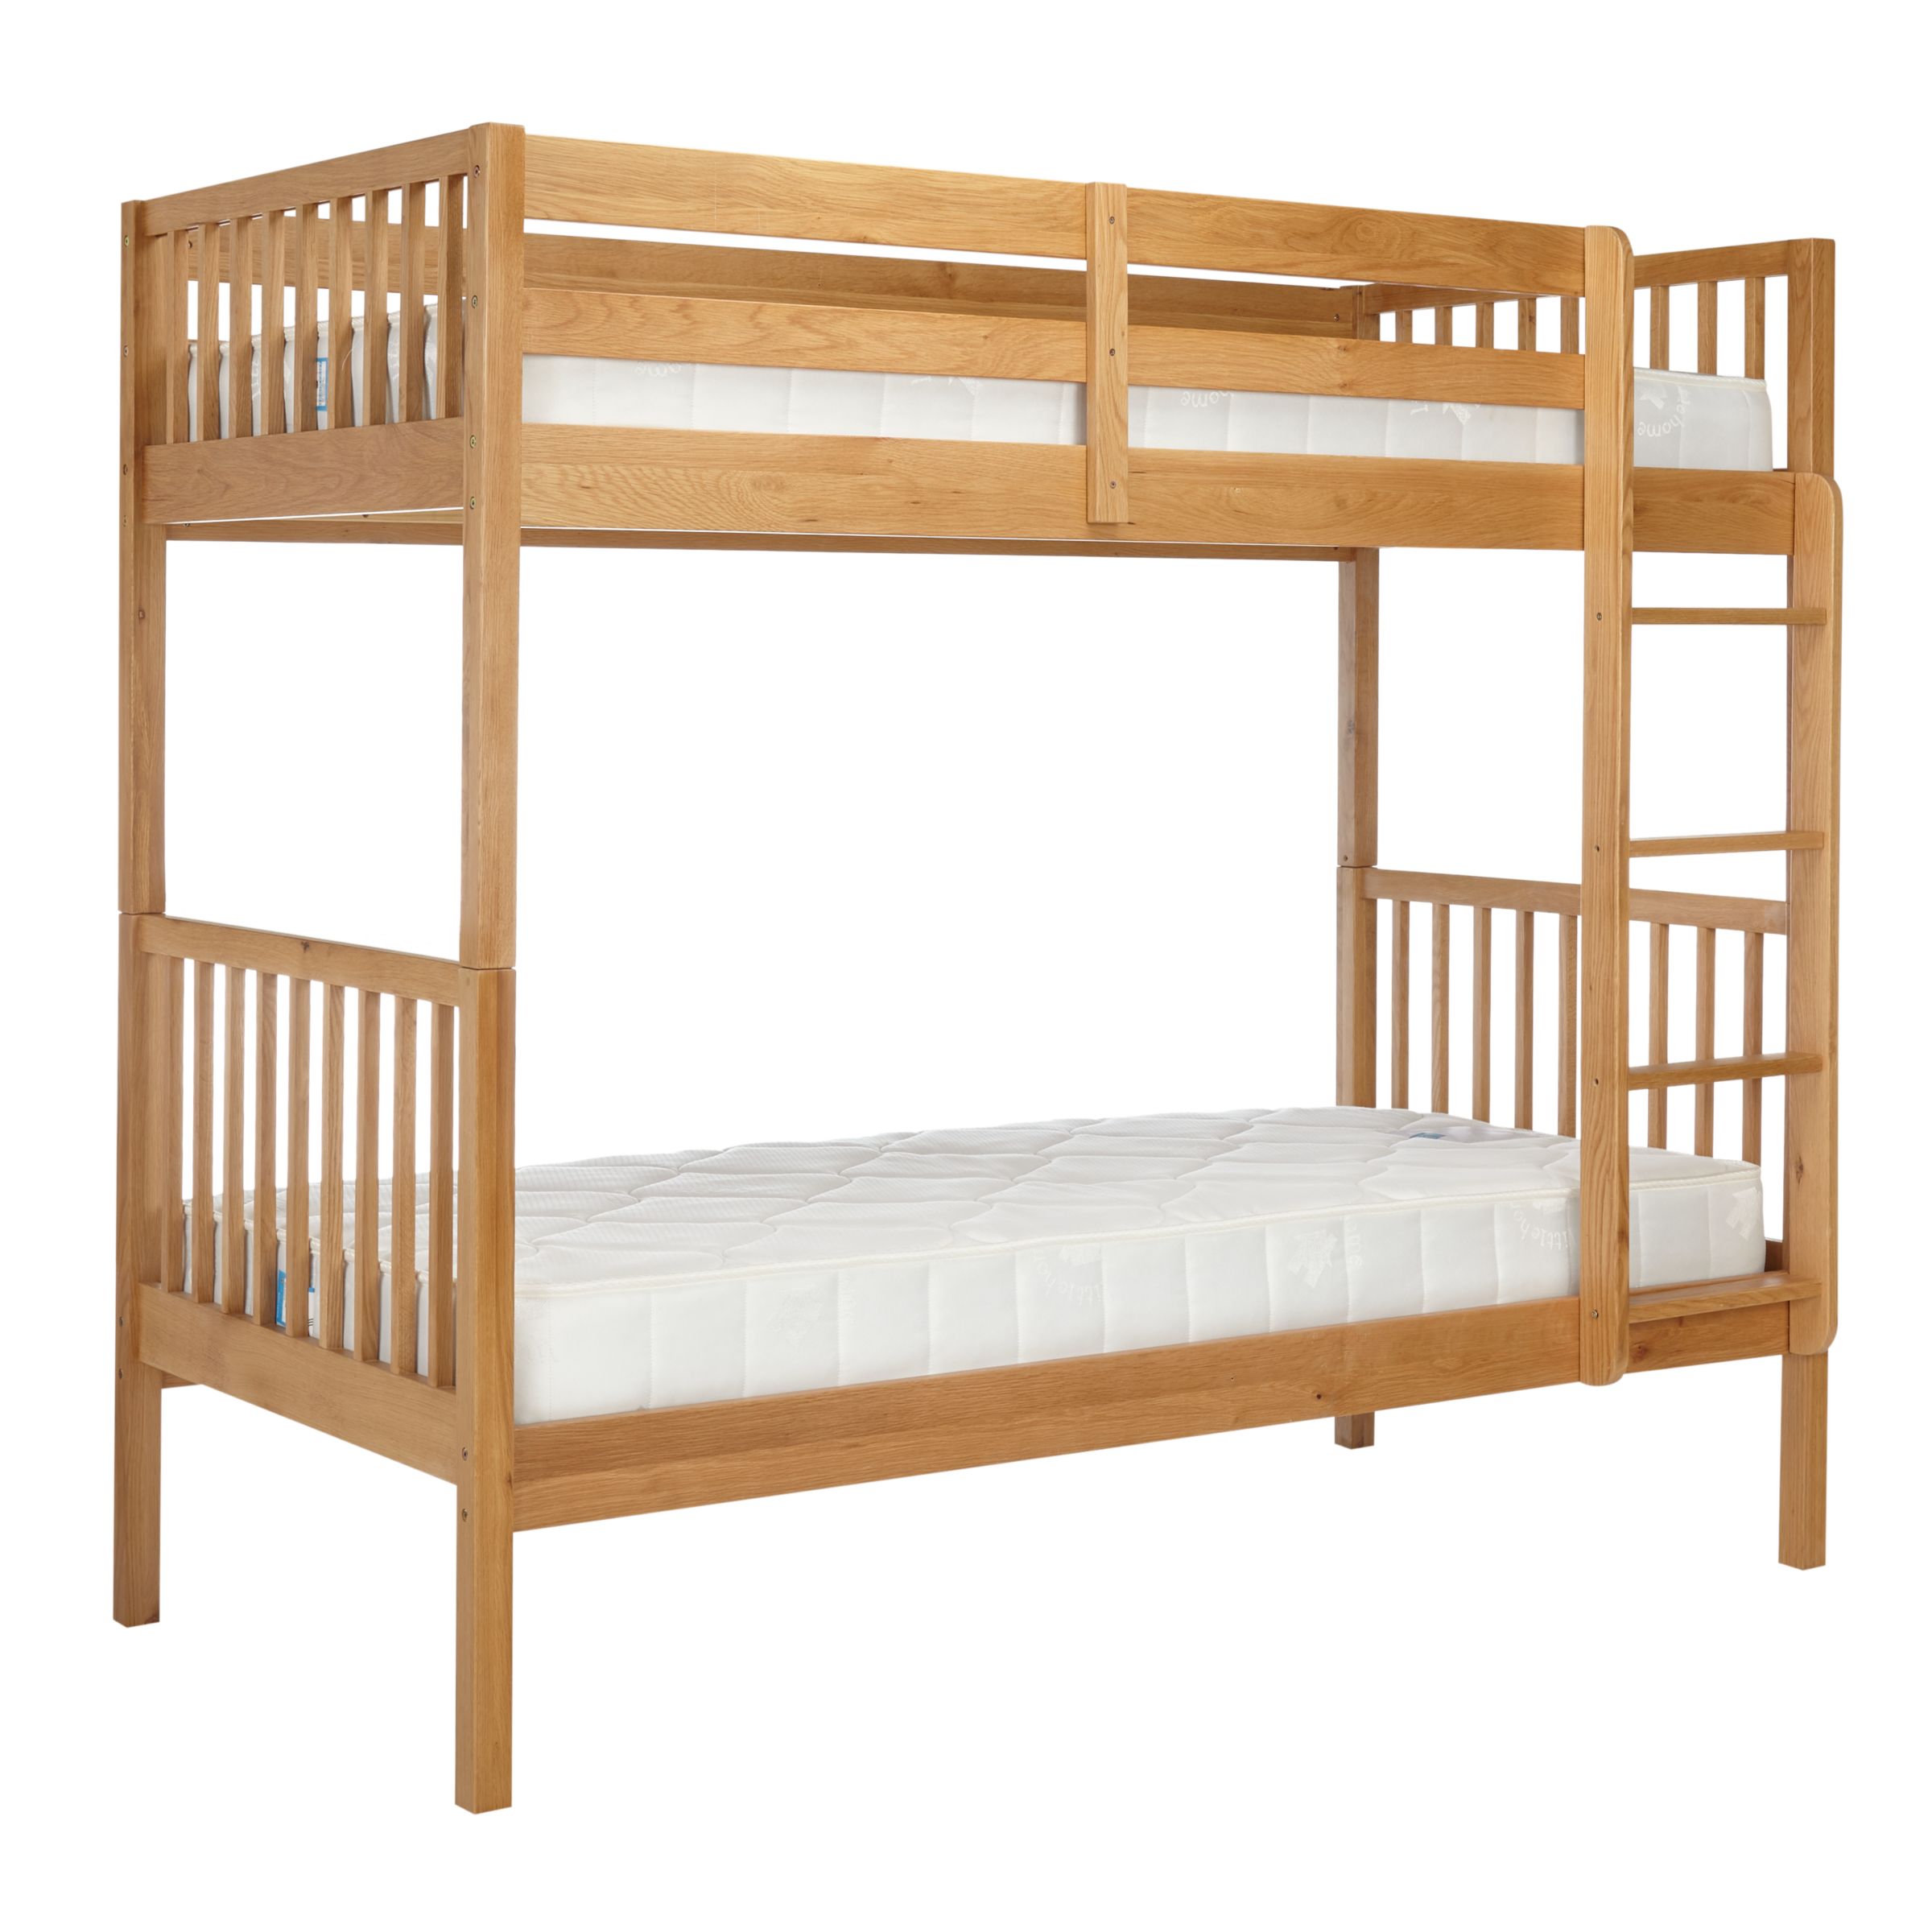 John Lewis Morgan Story Time Bunk Bed with little home at John Lewis 15cm Deep Open Spring Water Resistant Mattresses, Single, Oak